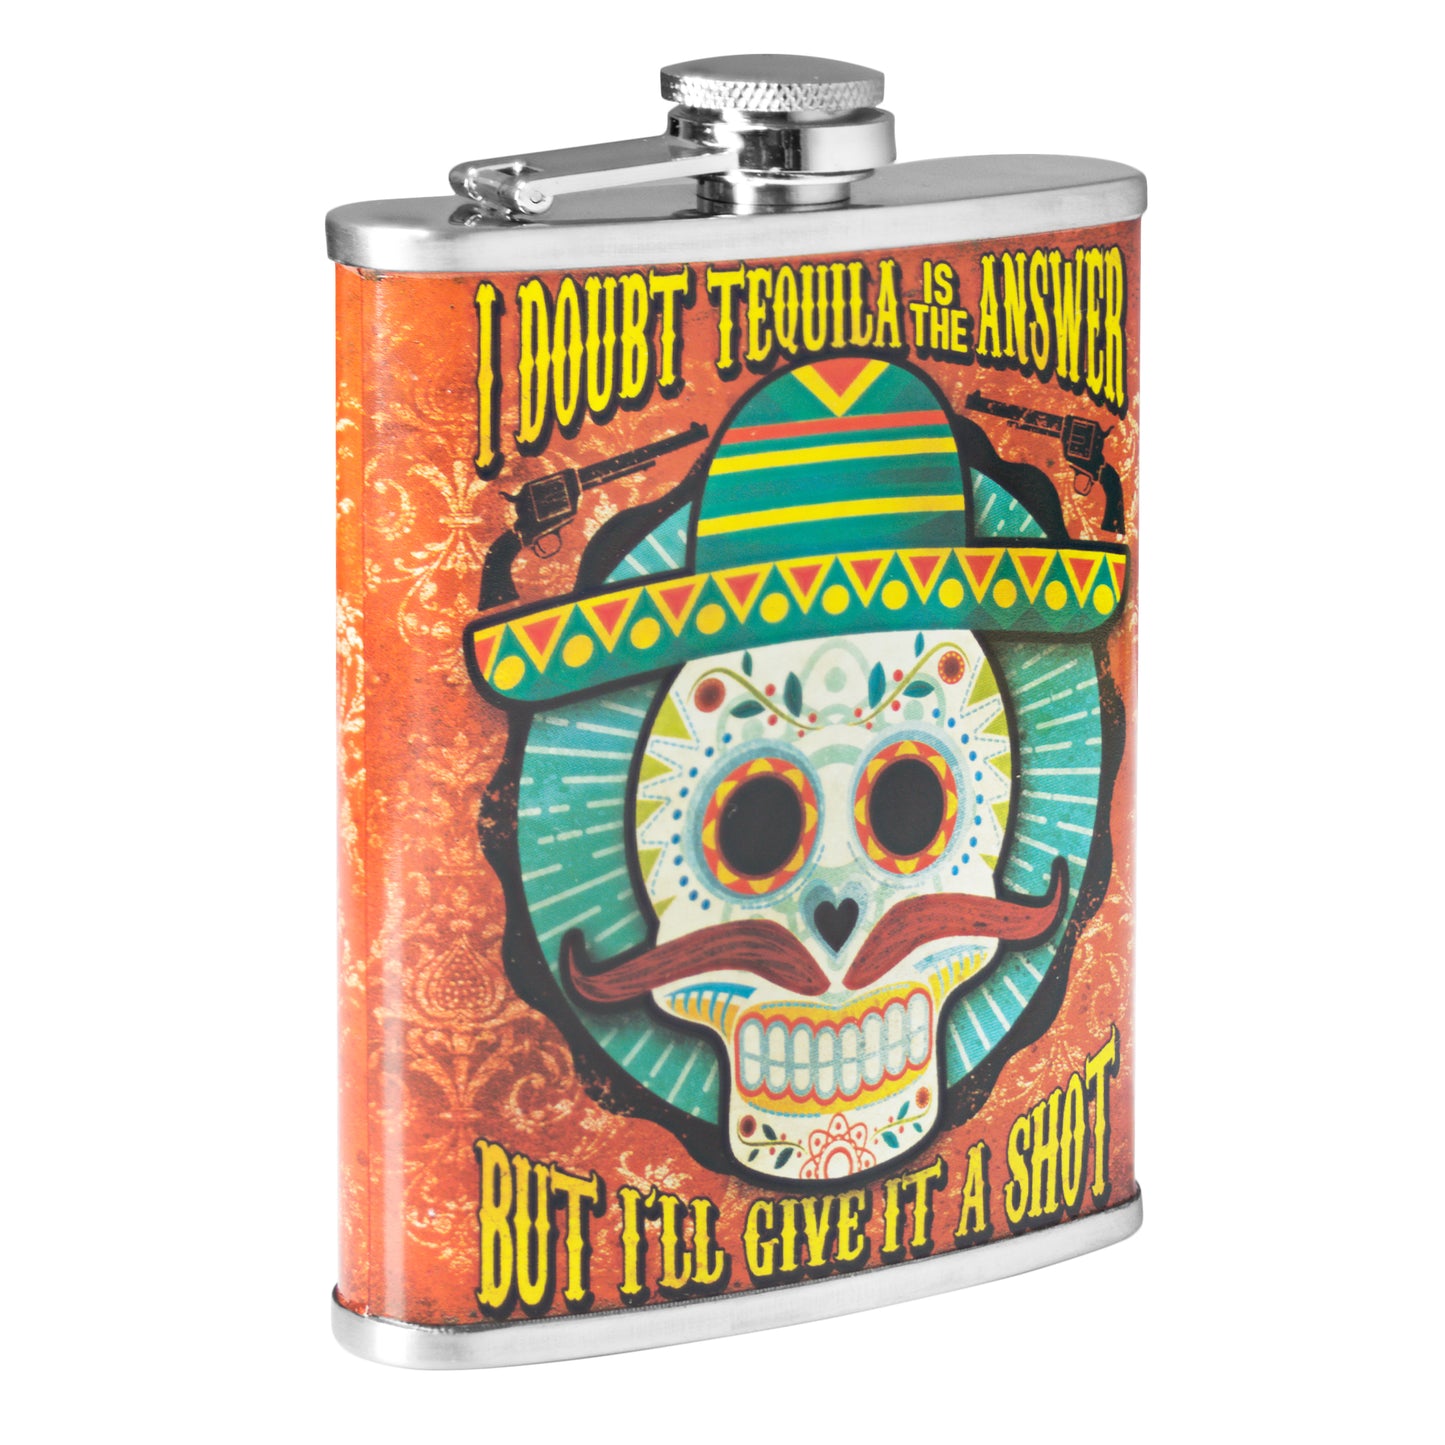 Doubt Tequila is the Answer Stainless Steel 8 oz Liquor Flask